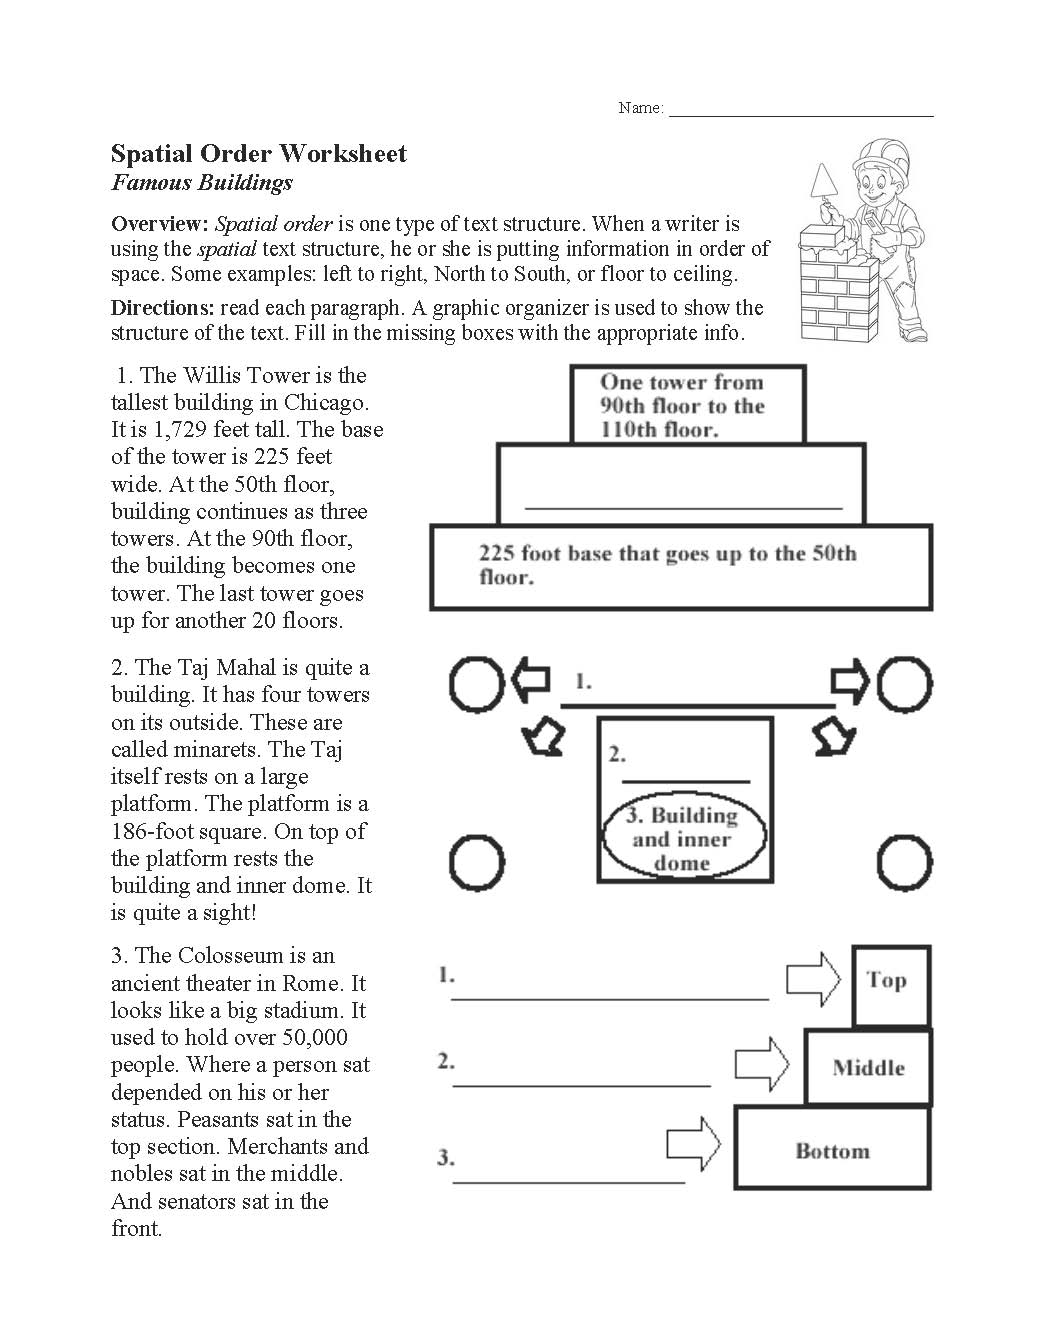 This is a preview image of our Spatial Order Worksheet. Click on it to enlarge or view the source file.